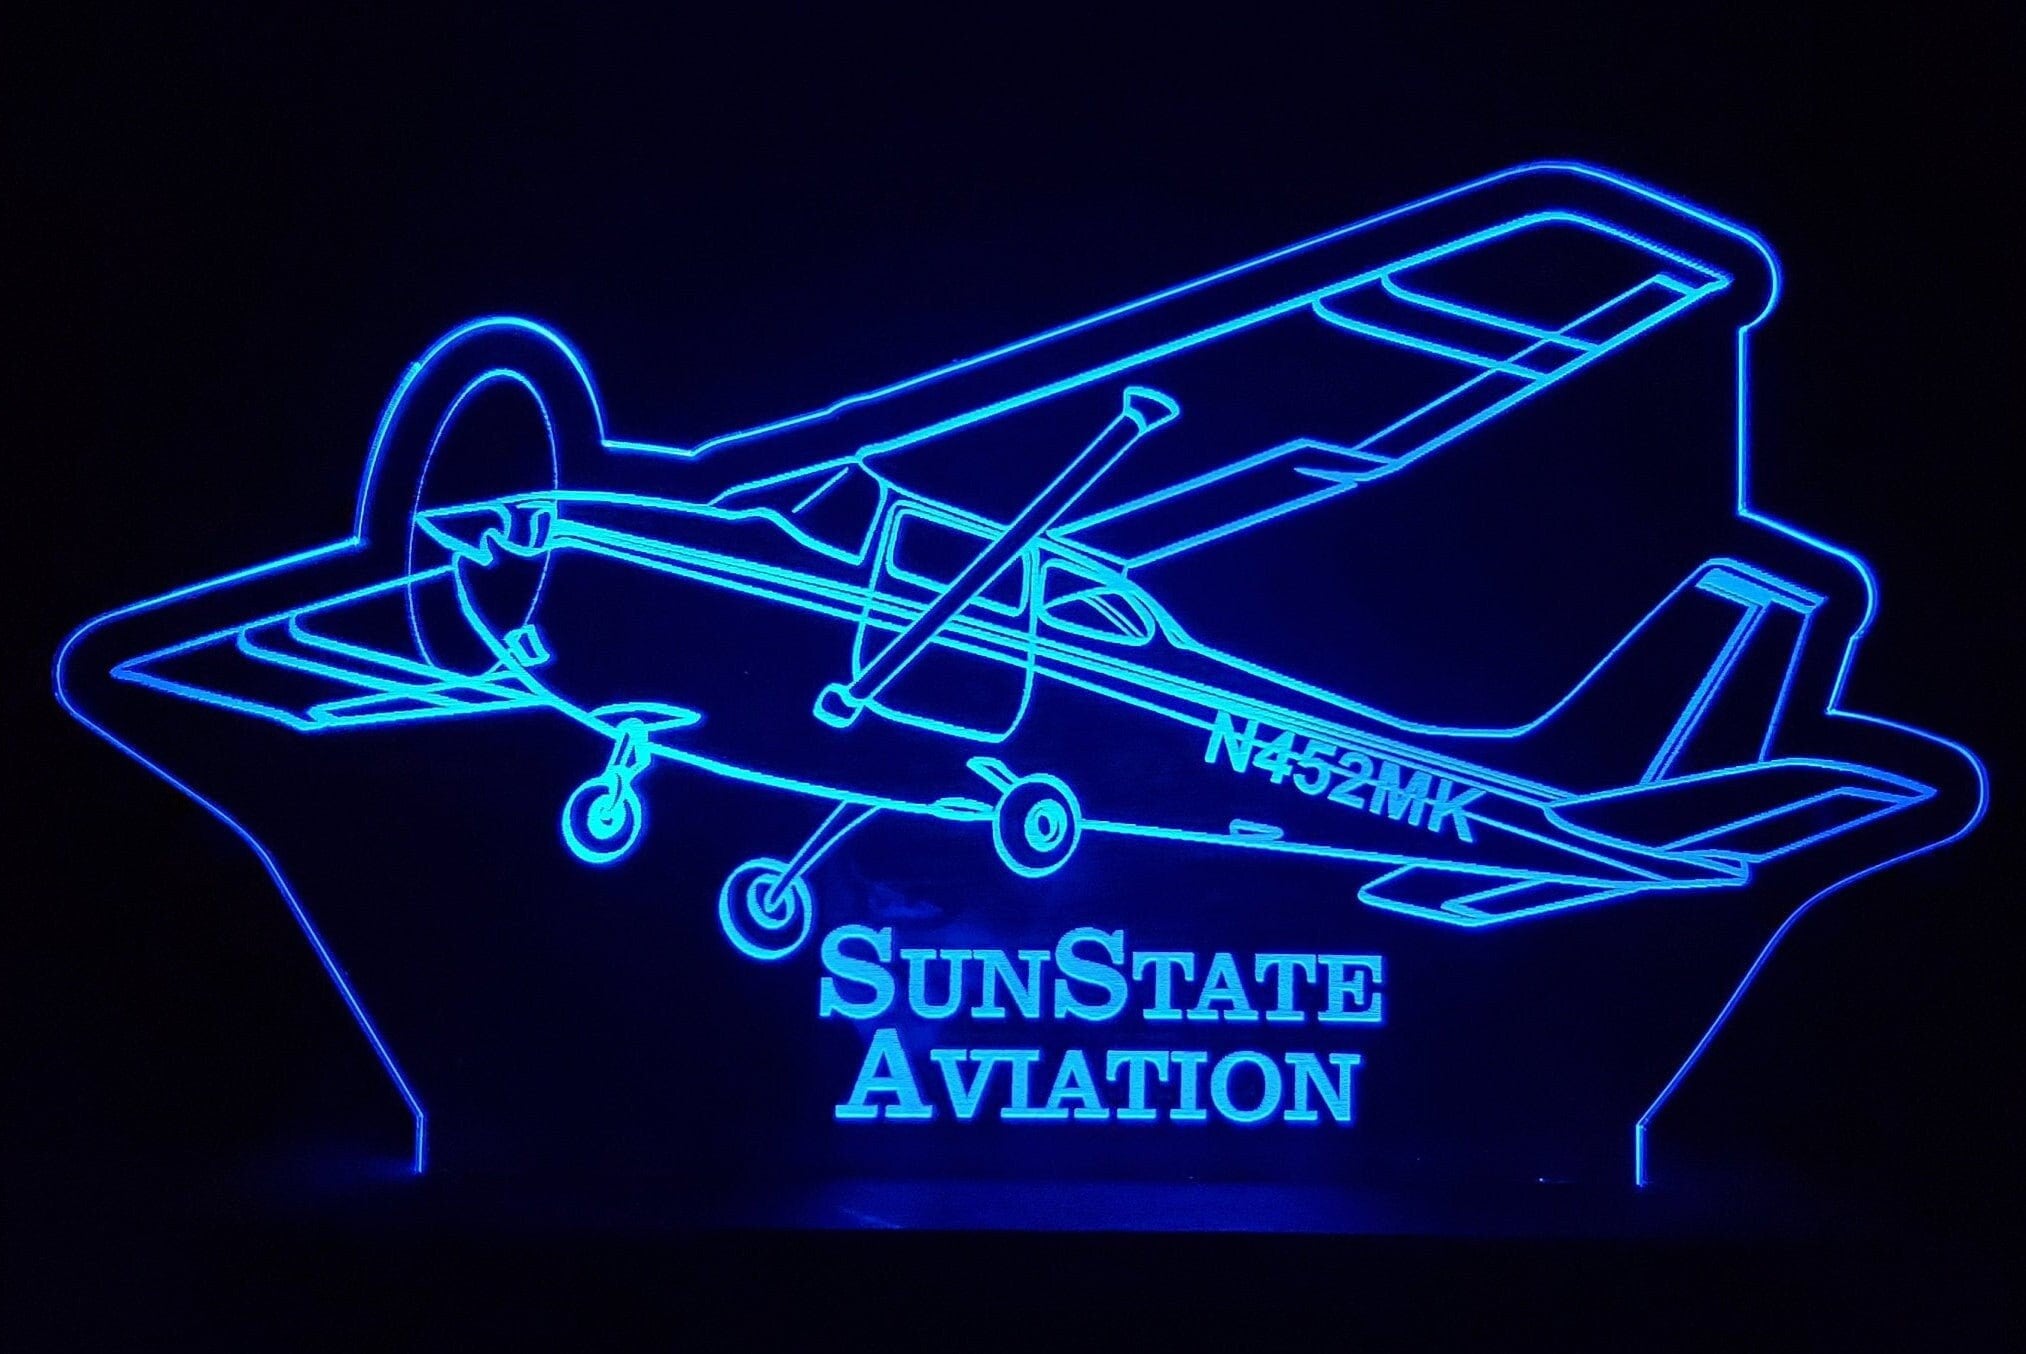 Cessna 172 LED light lamp/sign with customizable tail number and business name - Neon-like - Free shipping - Made in USA.